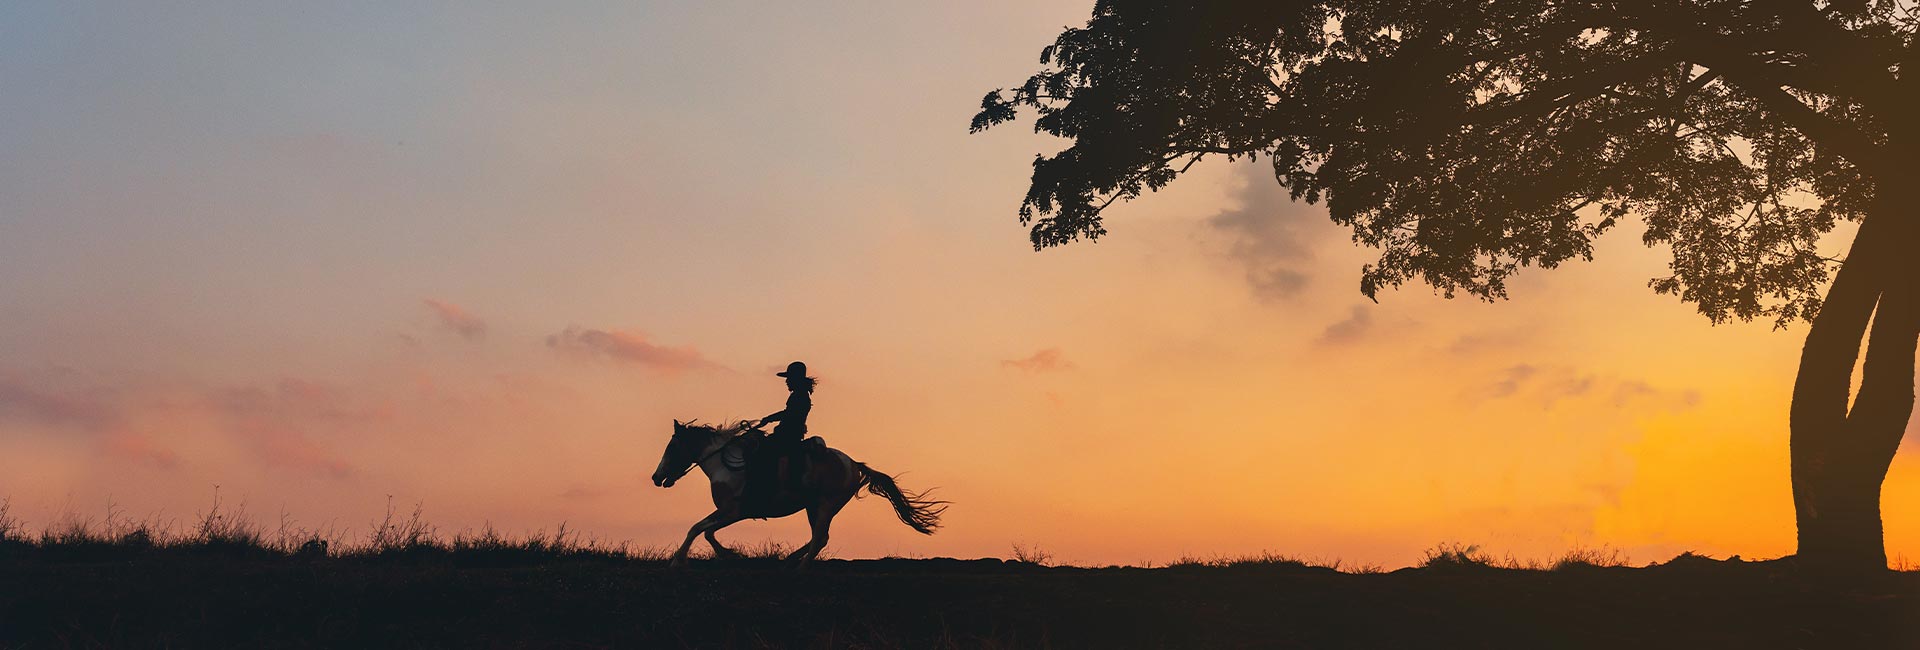 a sunset view of a person riding horseback along the horizon